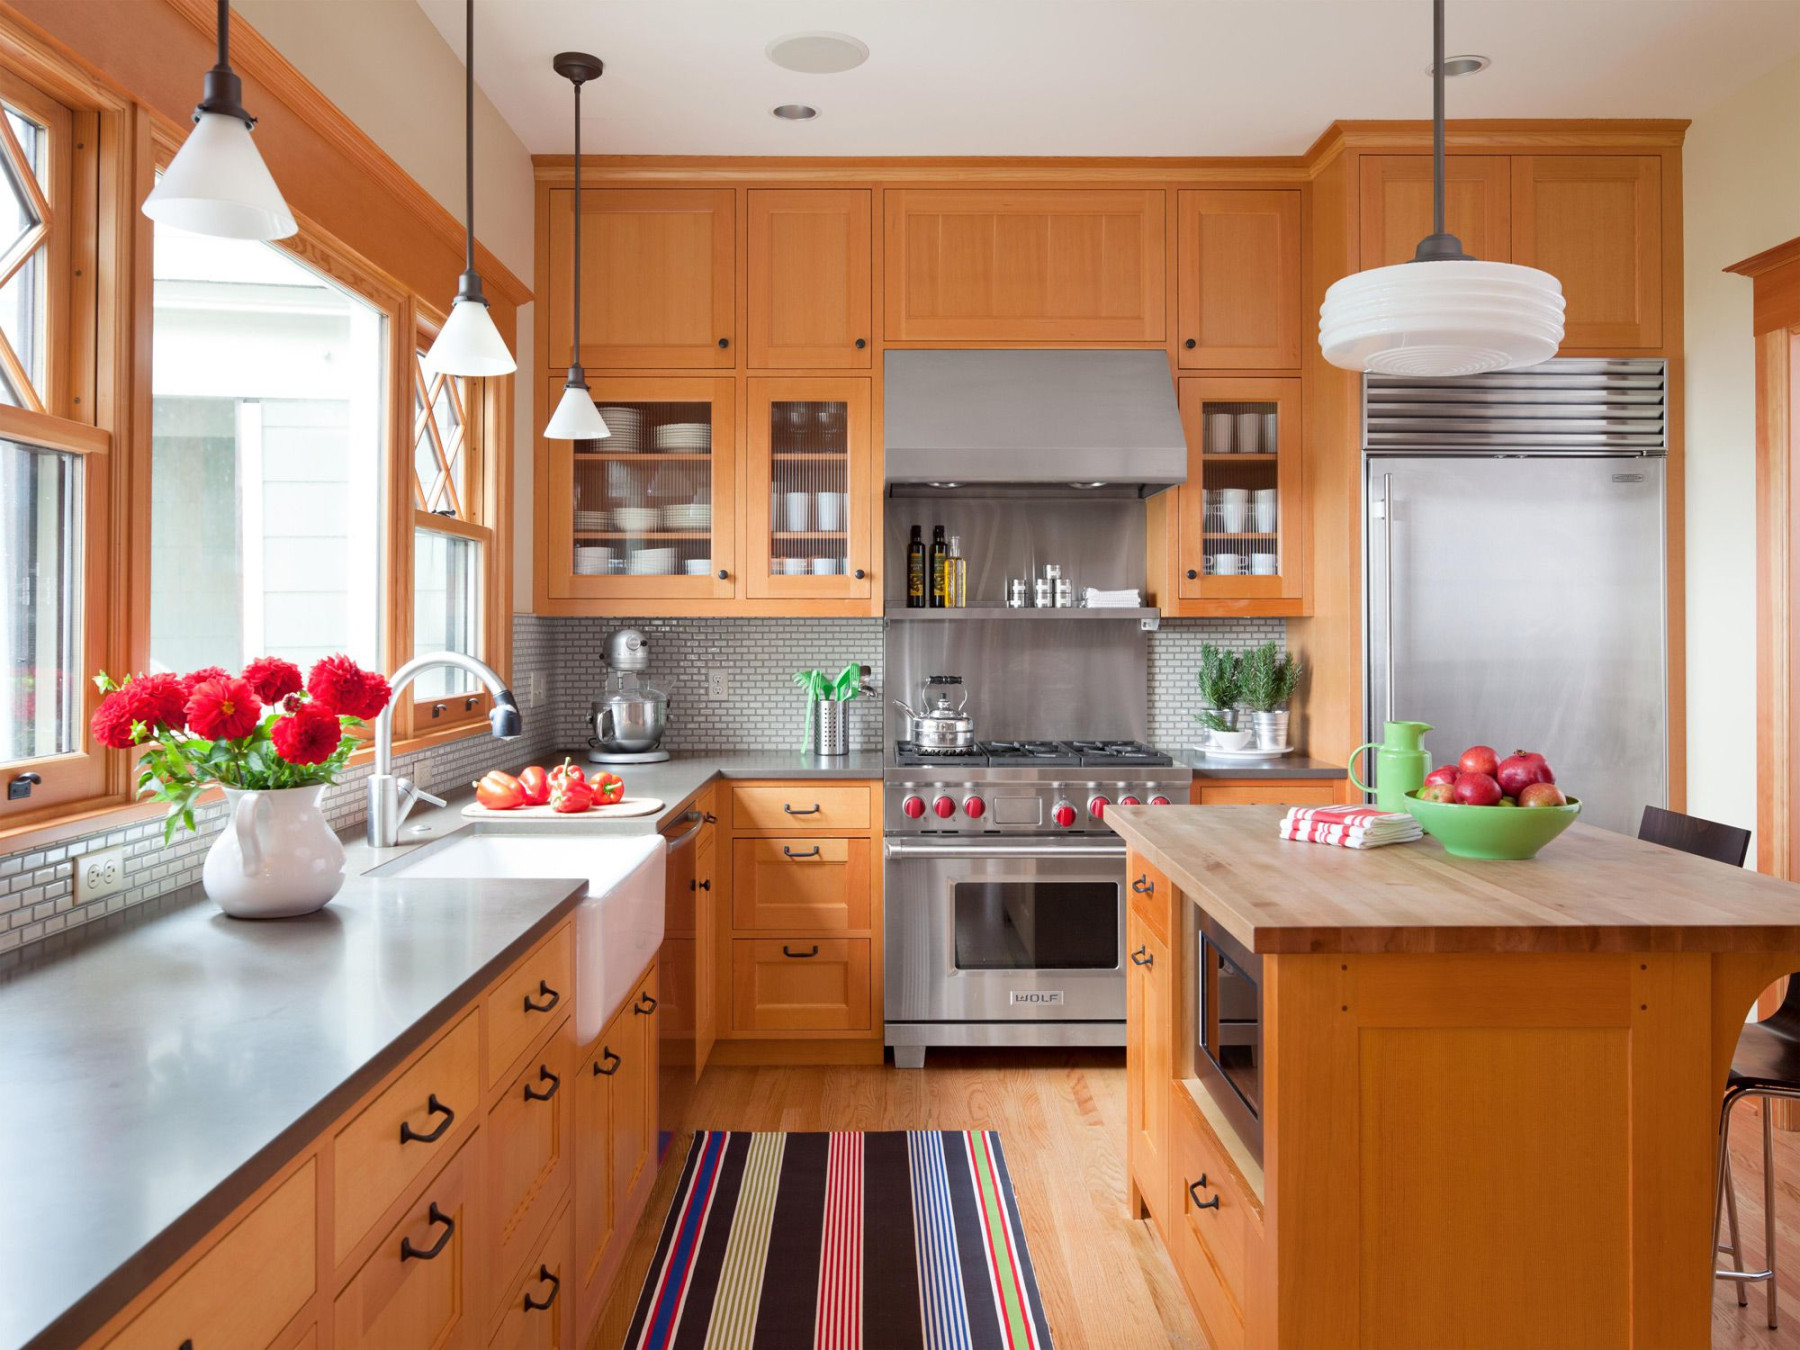 Before-and-After Kitchen Makeovers to Inspire Your Own Renovation